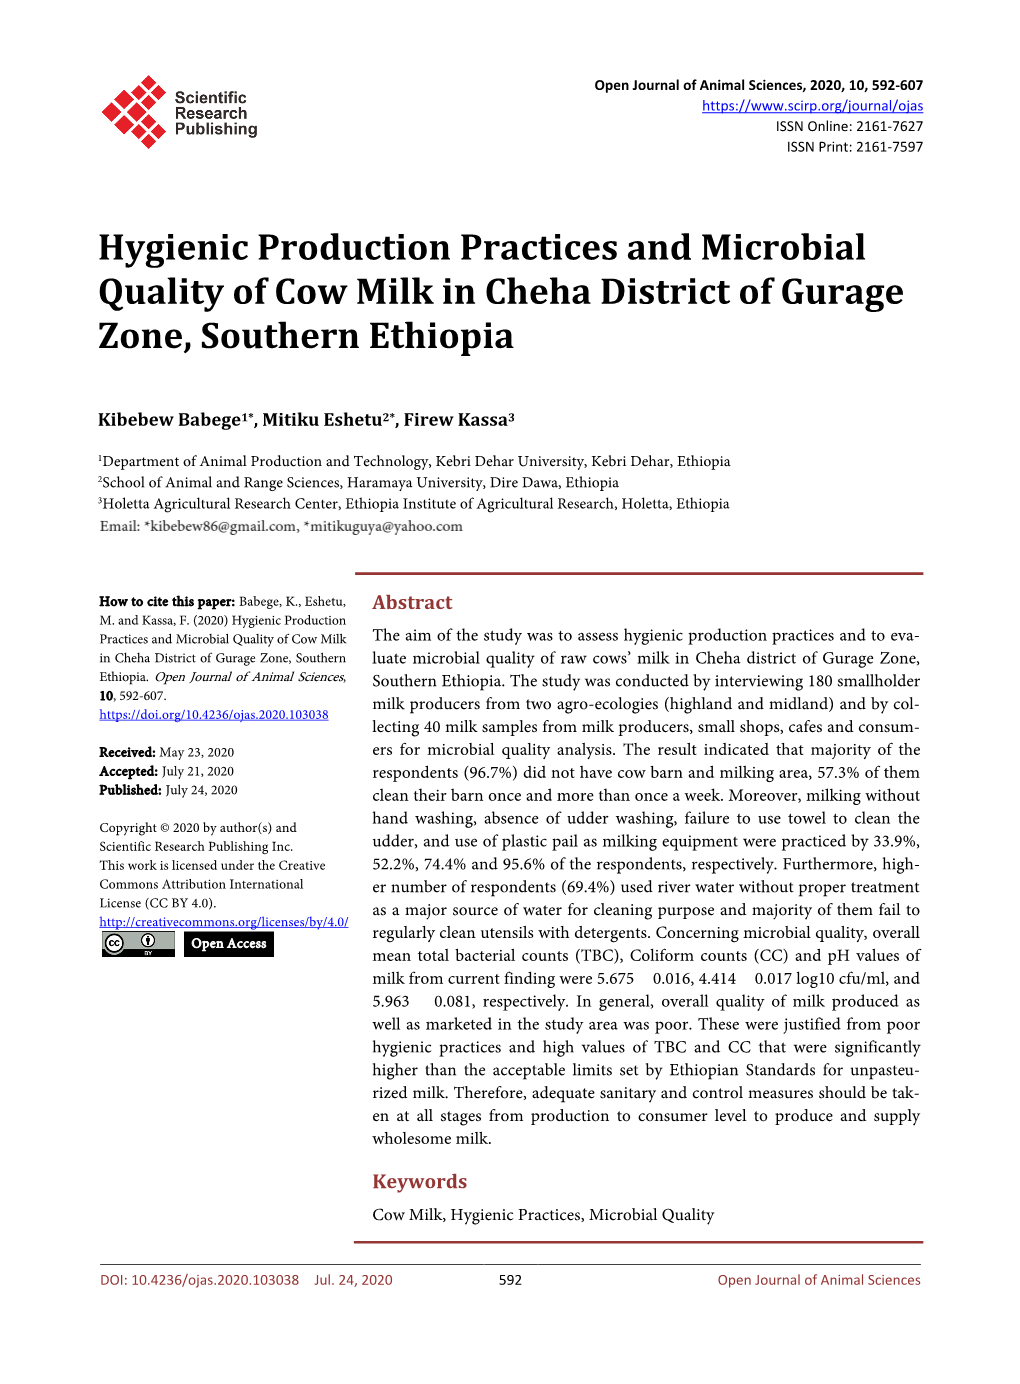 Hygienic Production Practices and Microbial Quality of Cow Milk in Cheha District of Gurage Zone, Southern Ethiopia